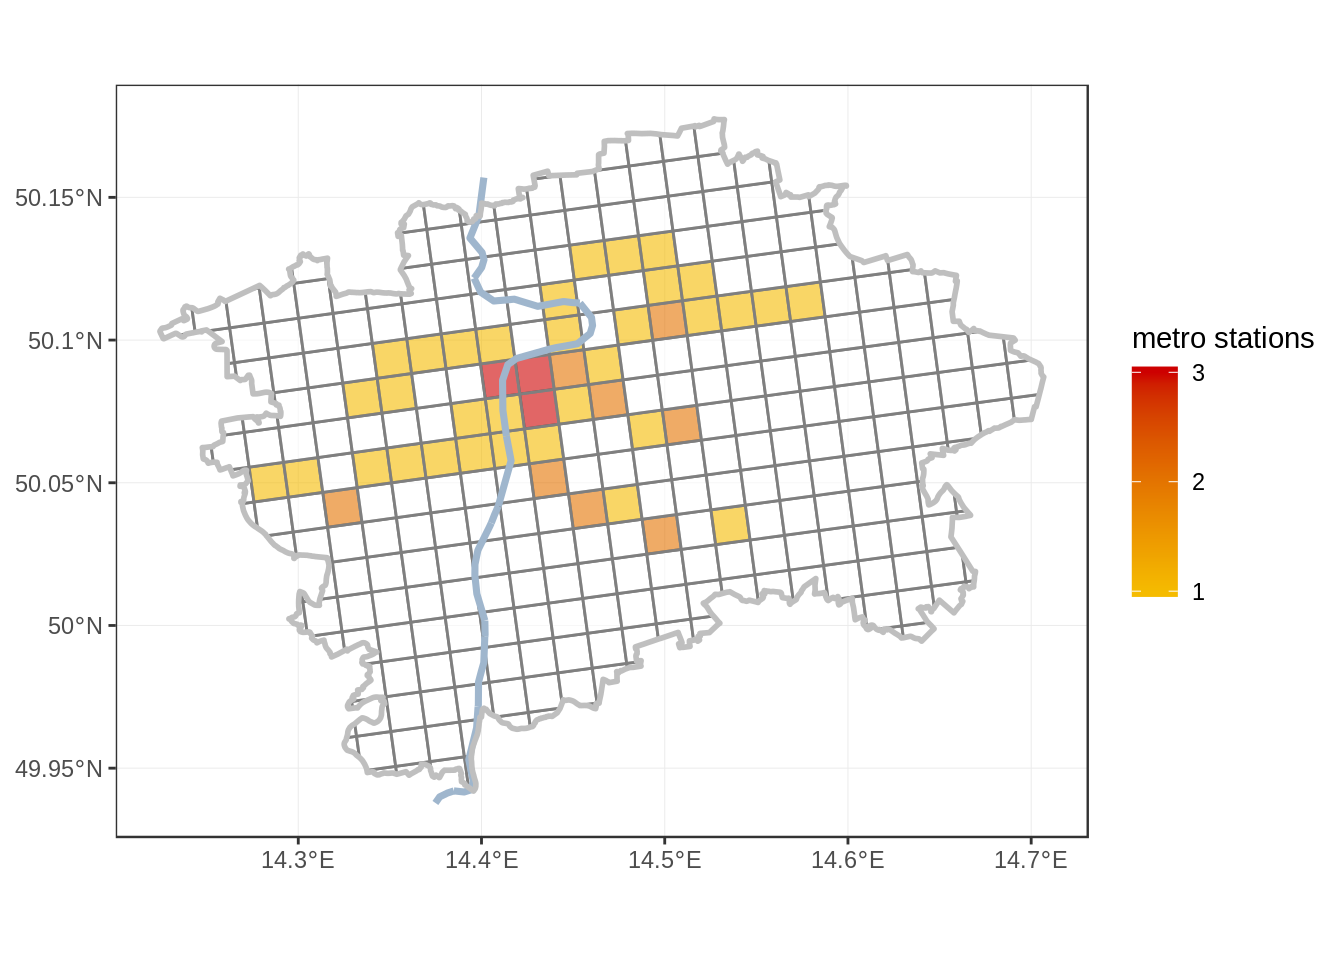 A case study for Branch Network Optimization, using R as a GIS tool.